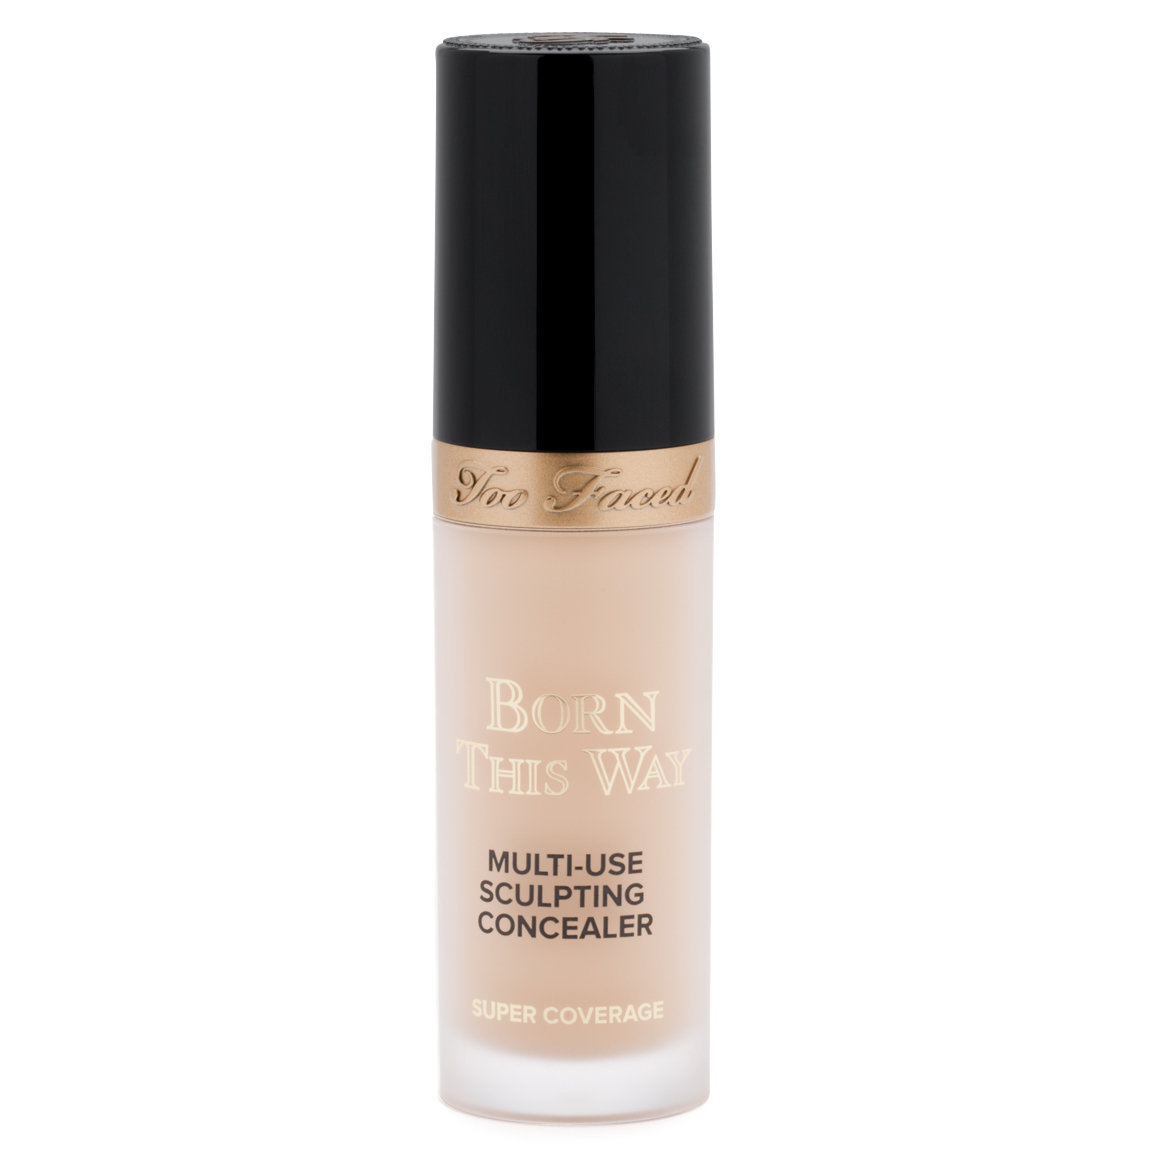 Too Faced Born This Way Super Coverage Multi-Use Sculpting Concealer - Born This Way Concealer Almond